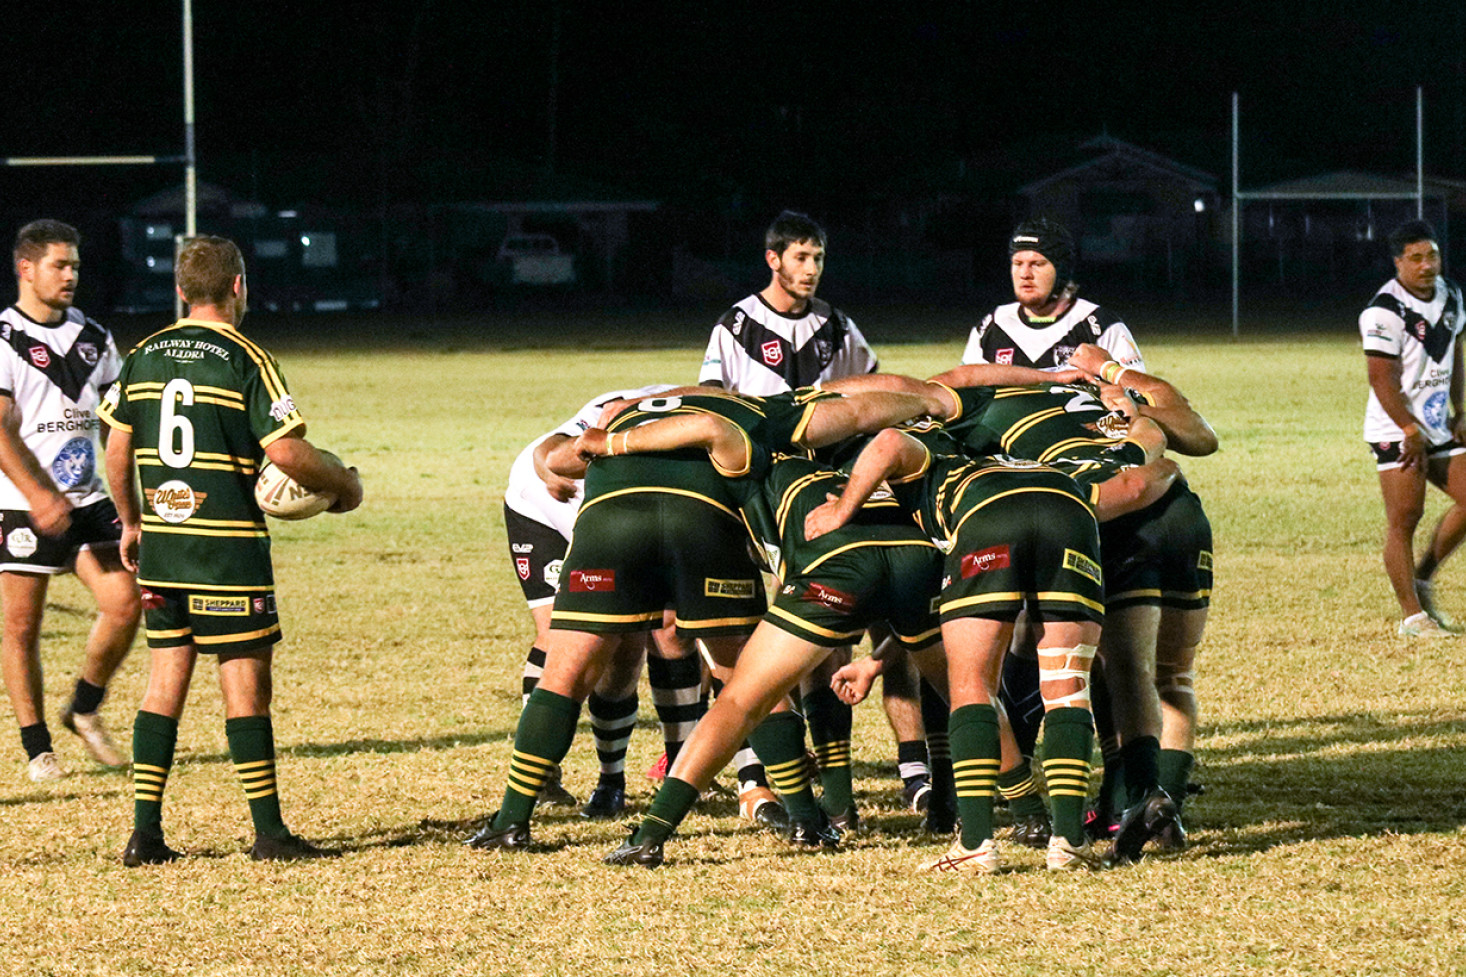 ABOVE: The reserves players pack a scrum.